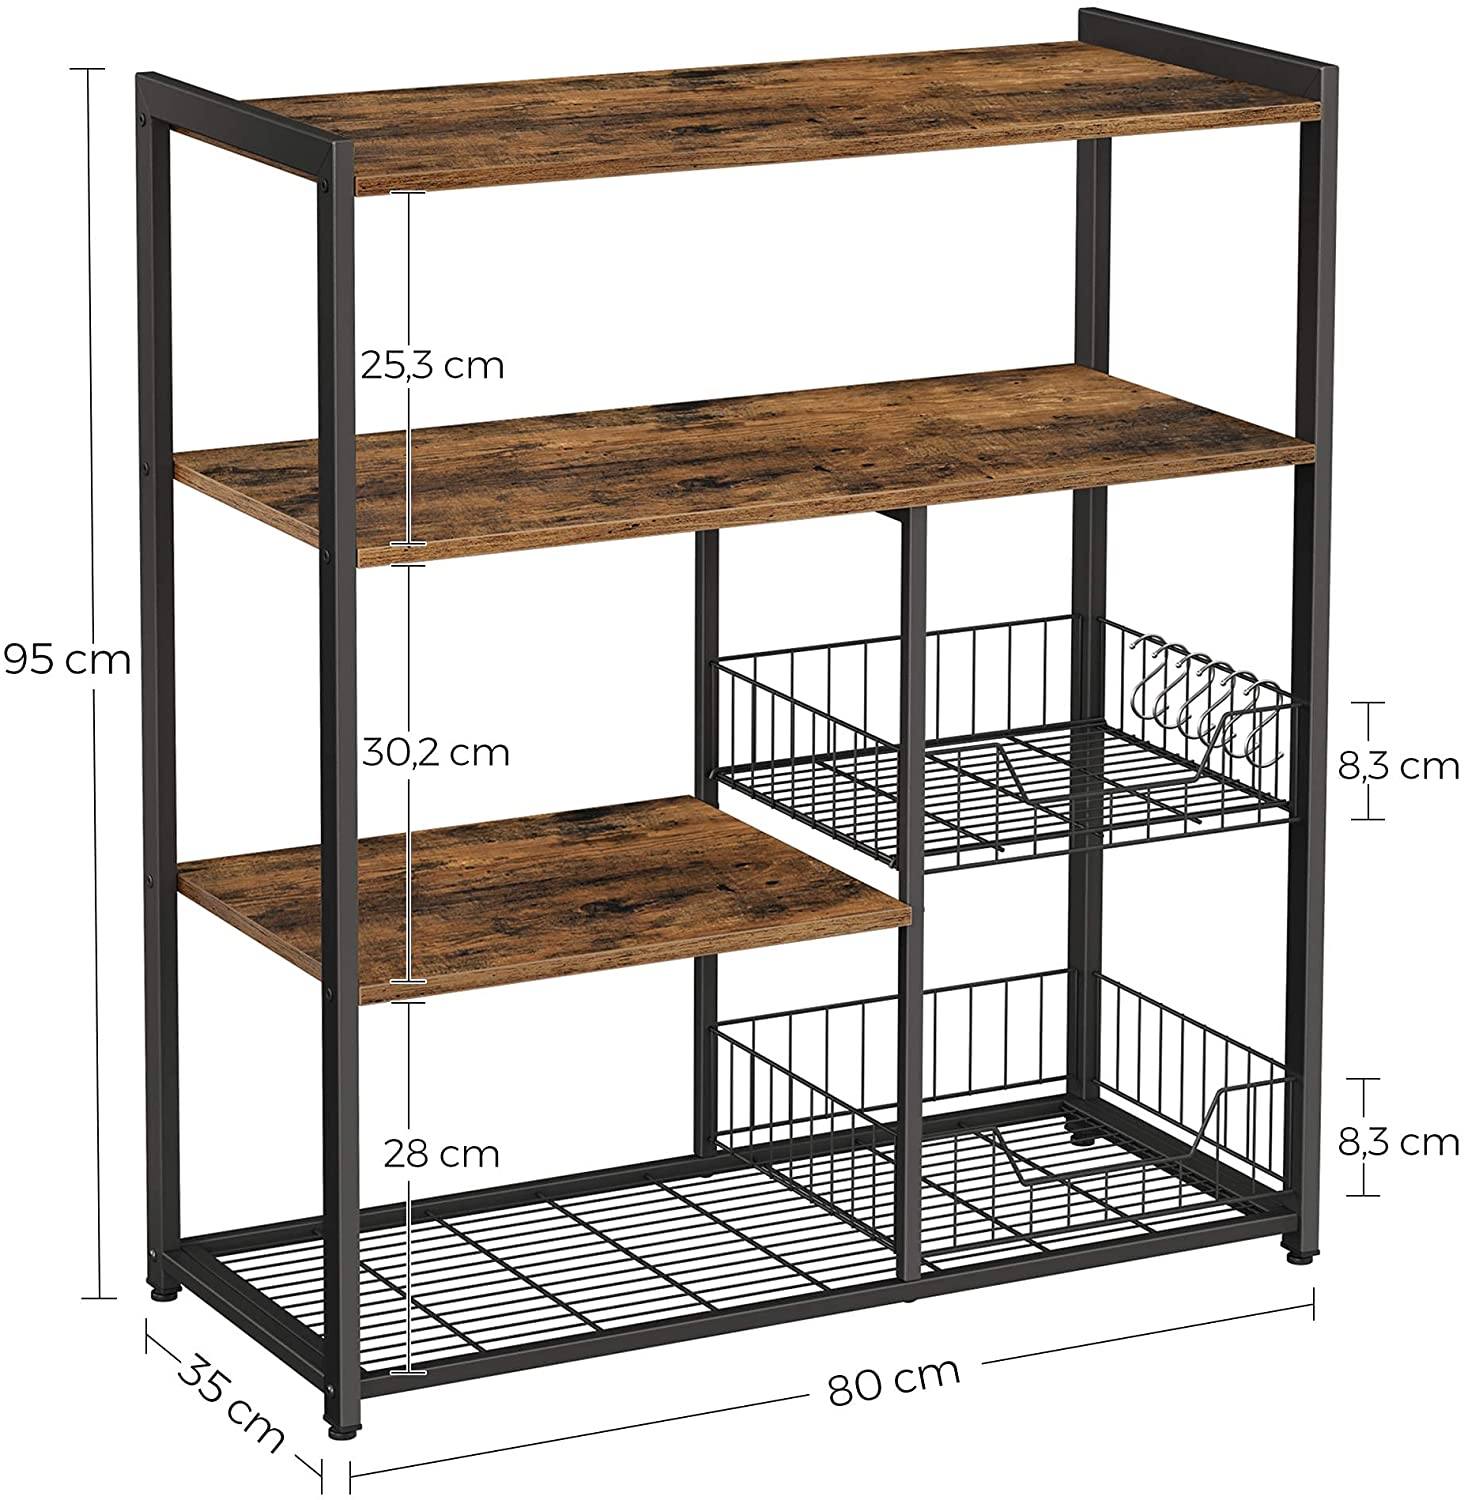 Baker? Rack, Kitchen Island with 2 metal Mesh Baskets, Shelves and Hooks, 80 x 35 x 95 cm, Industrial Style, Rustic Brown KKS96X RAW58.dk 